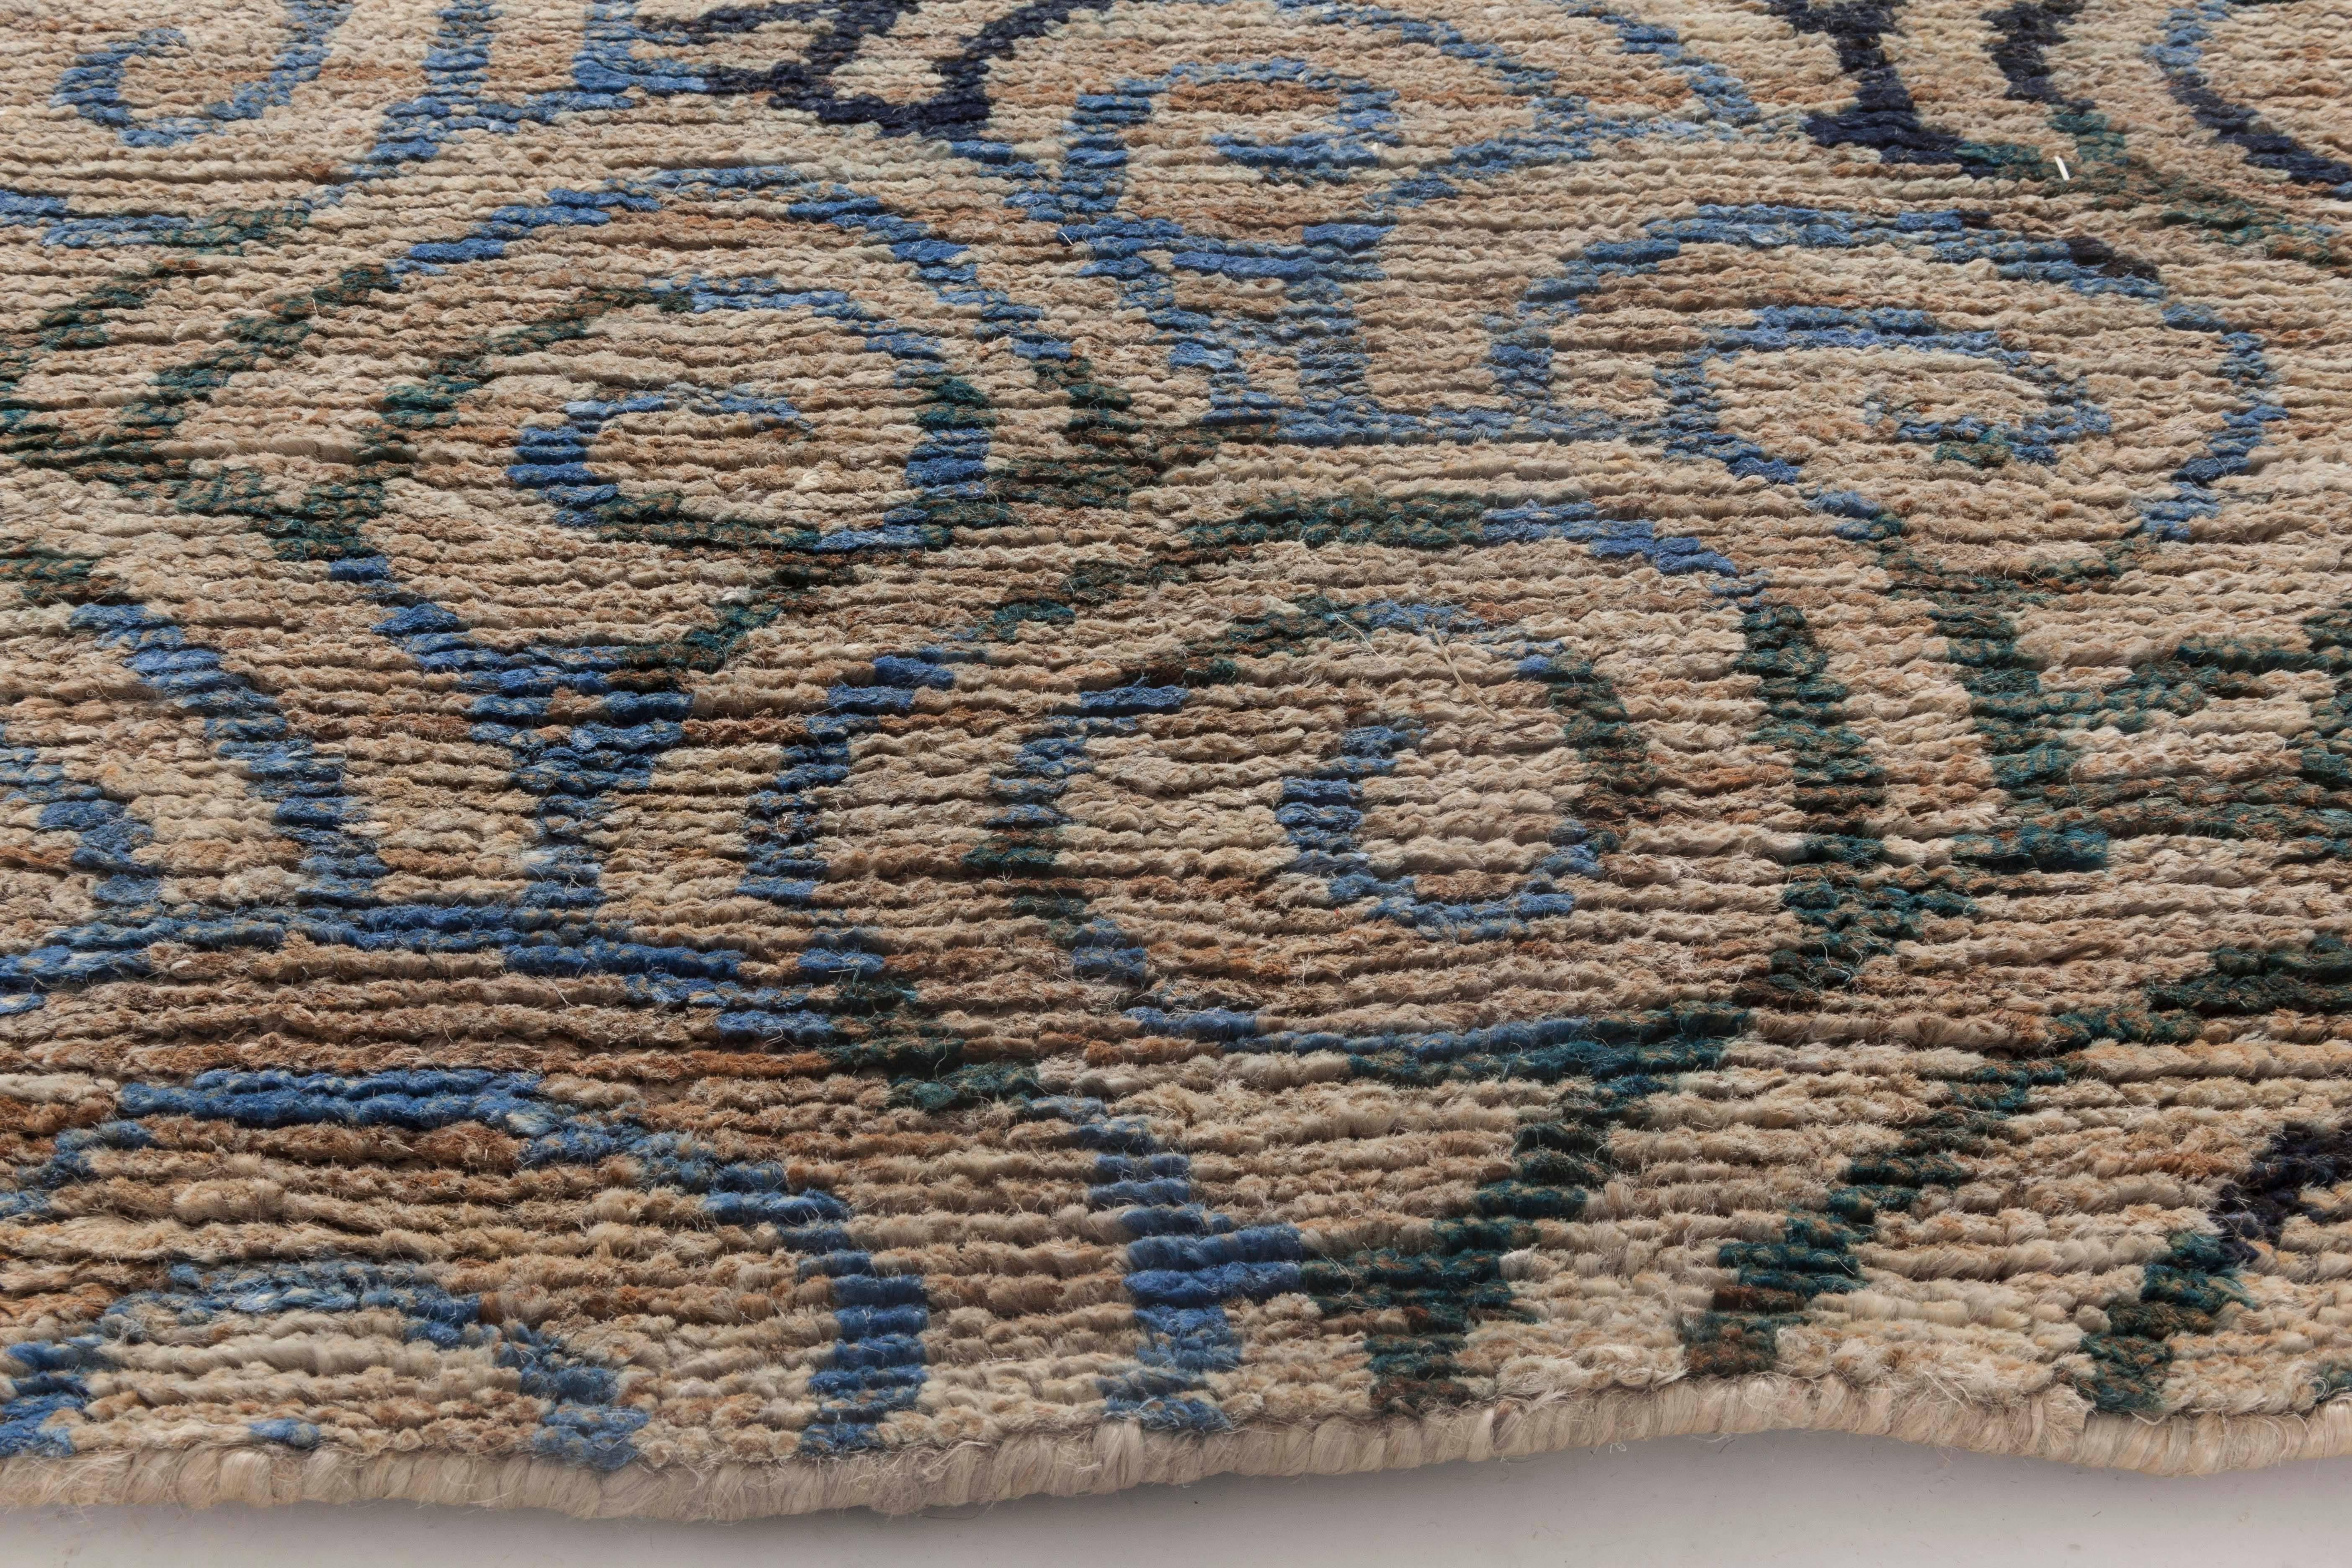 Contemporary beige, grey and sky blue hand knotted Hemp rug by Doris Leslie Blau.
Size : 3'10